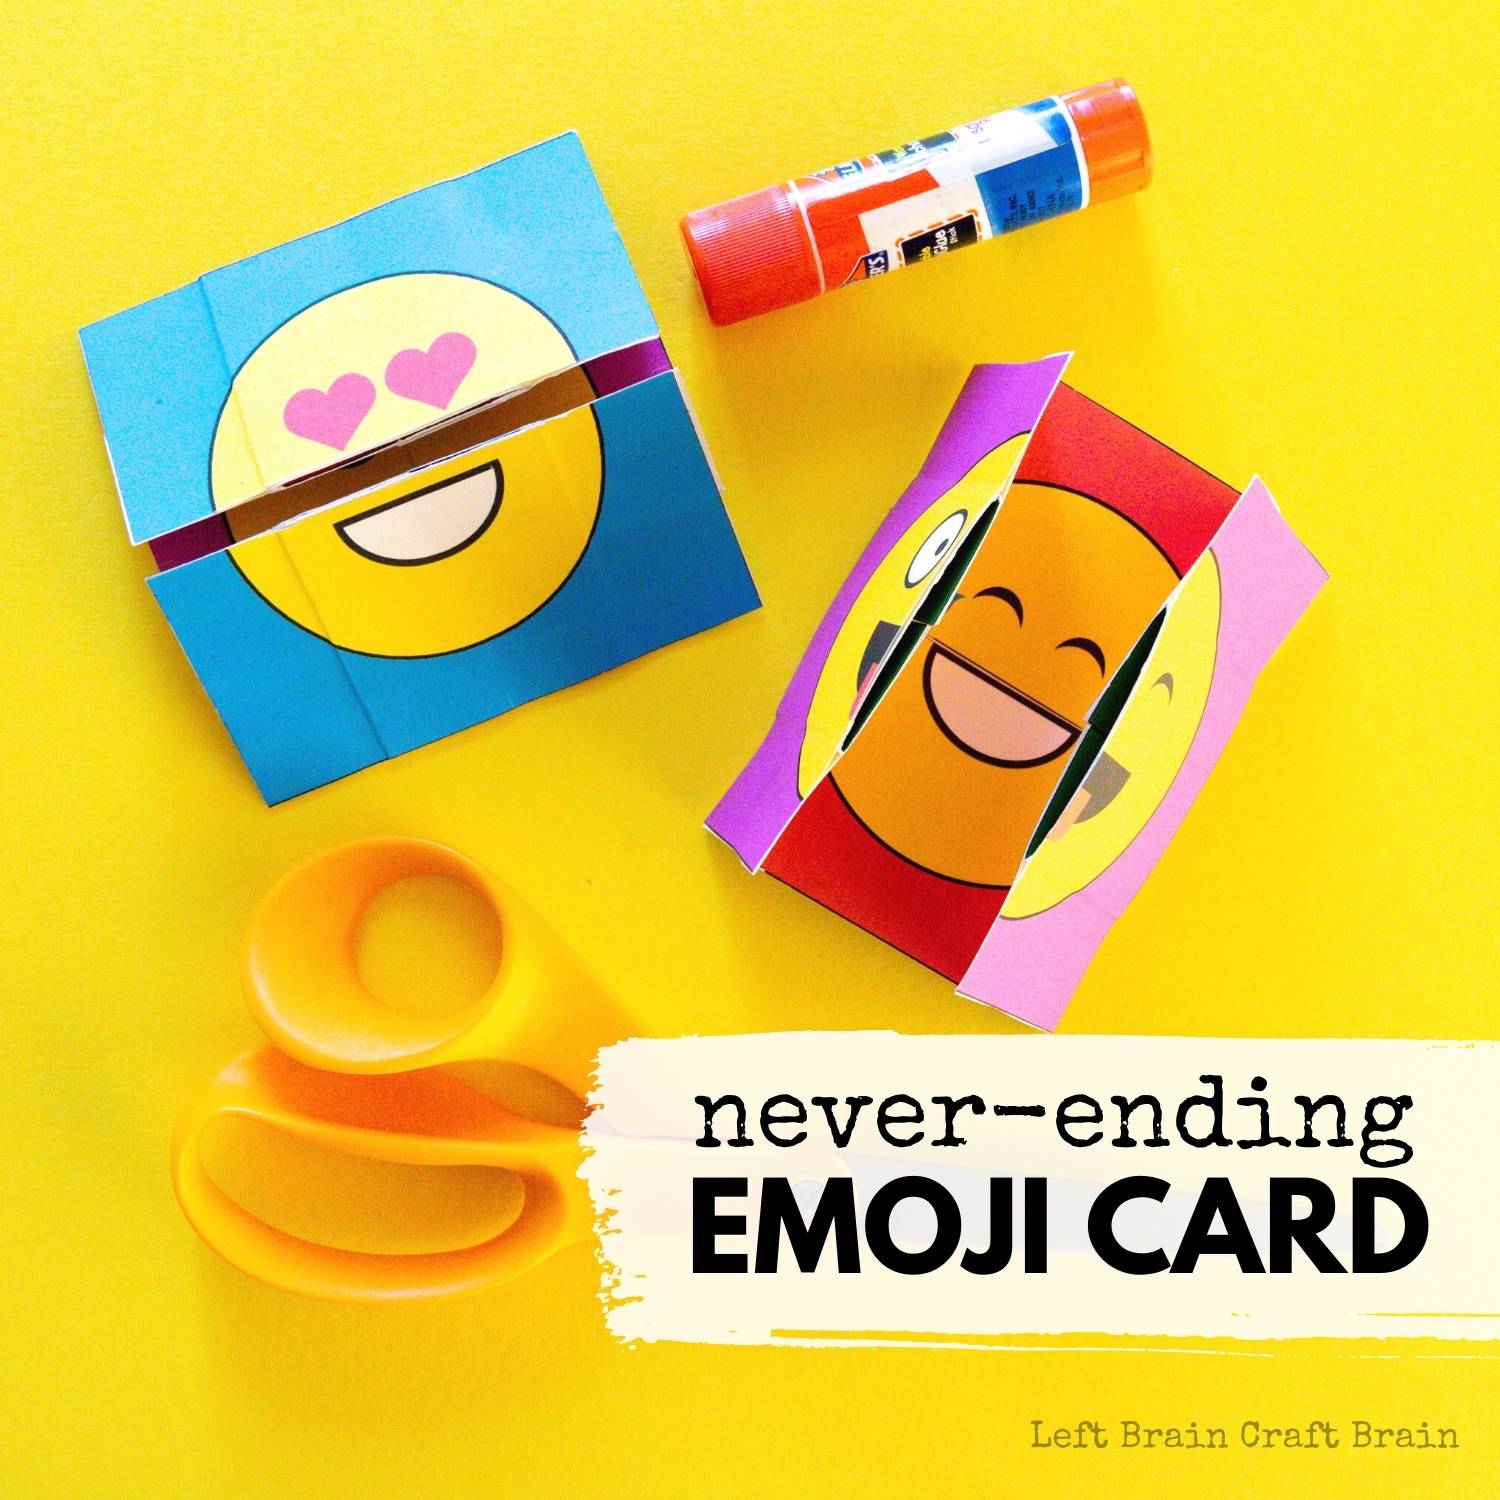 How to Make a Never-ending Emoji Card on yellow with glue stick